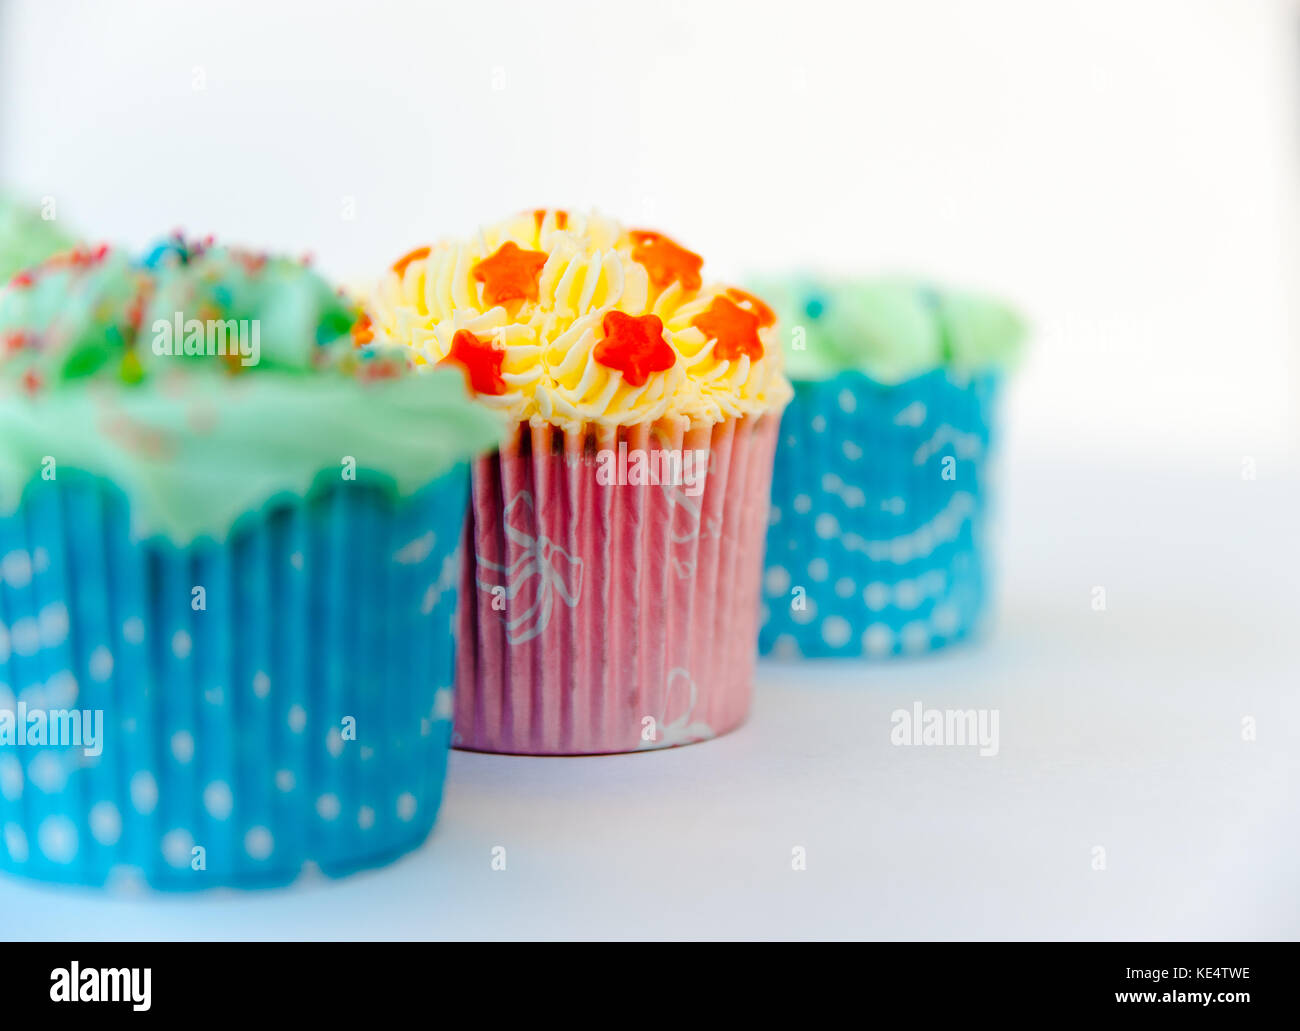 Homemade, colorful cupcakes with white background Stock Photo